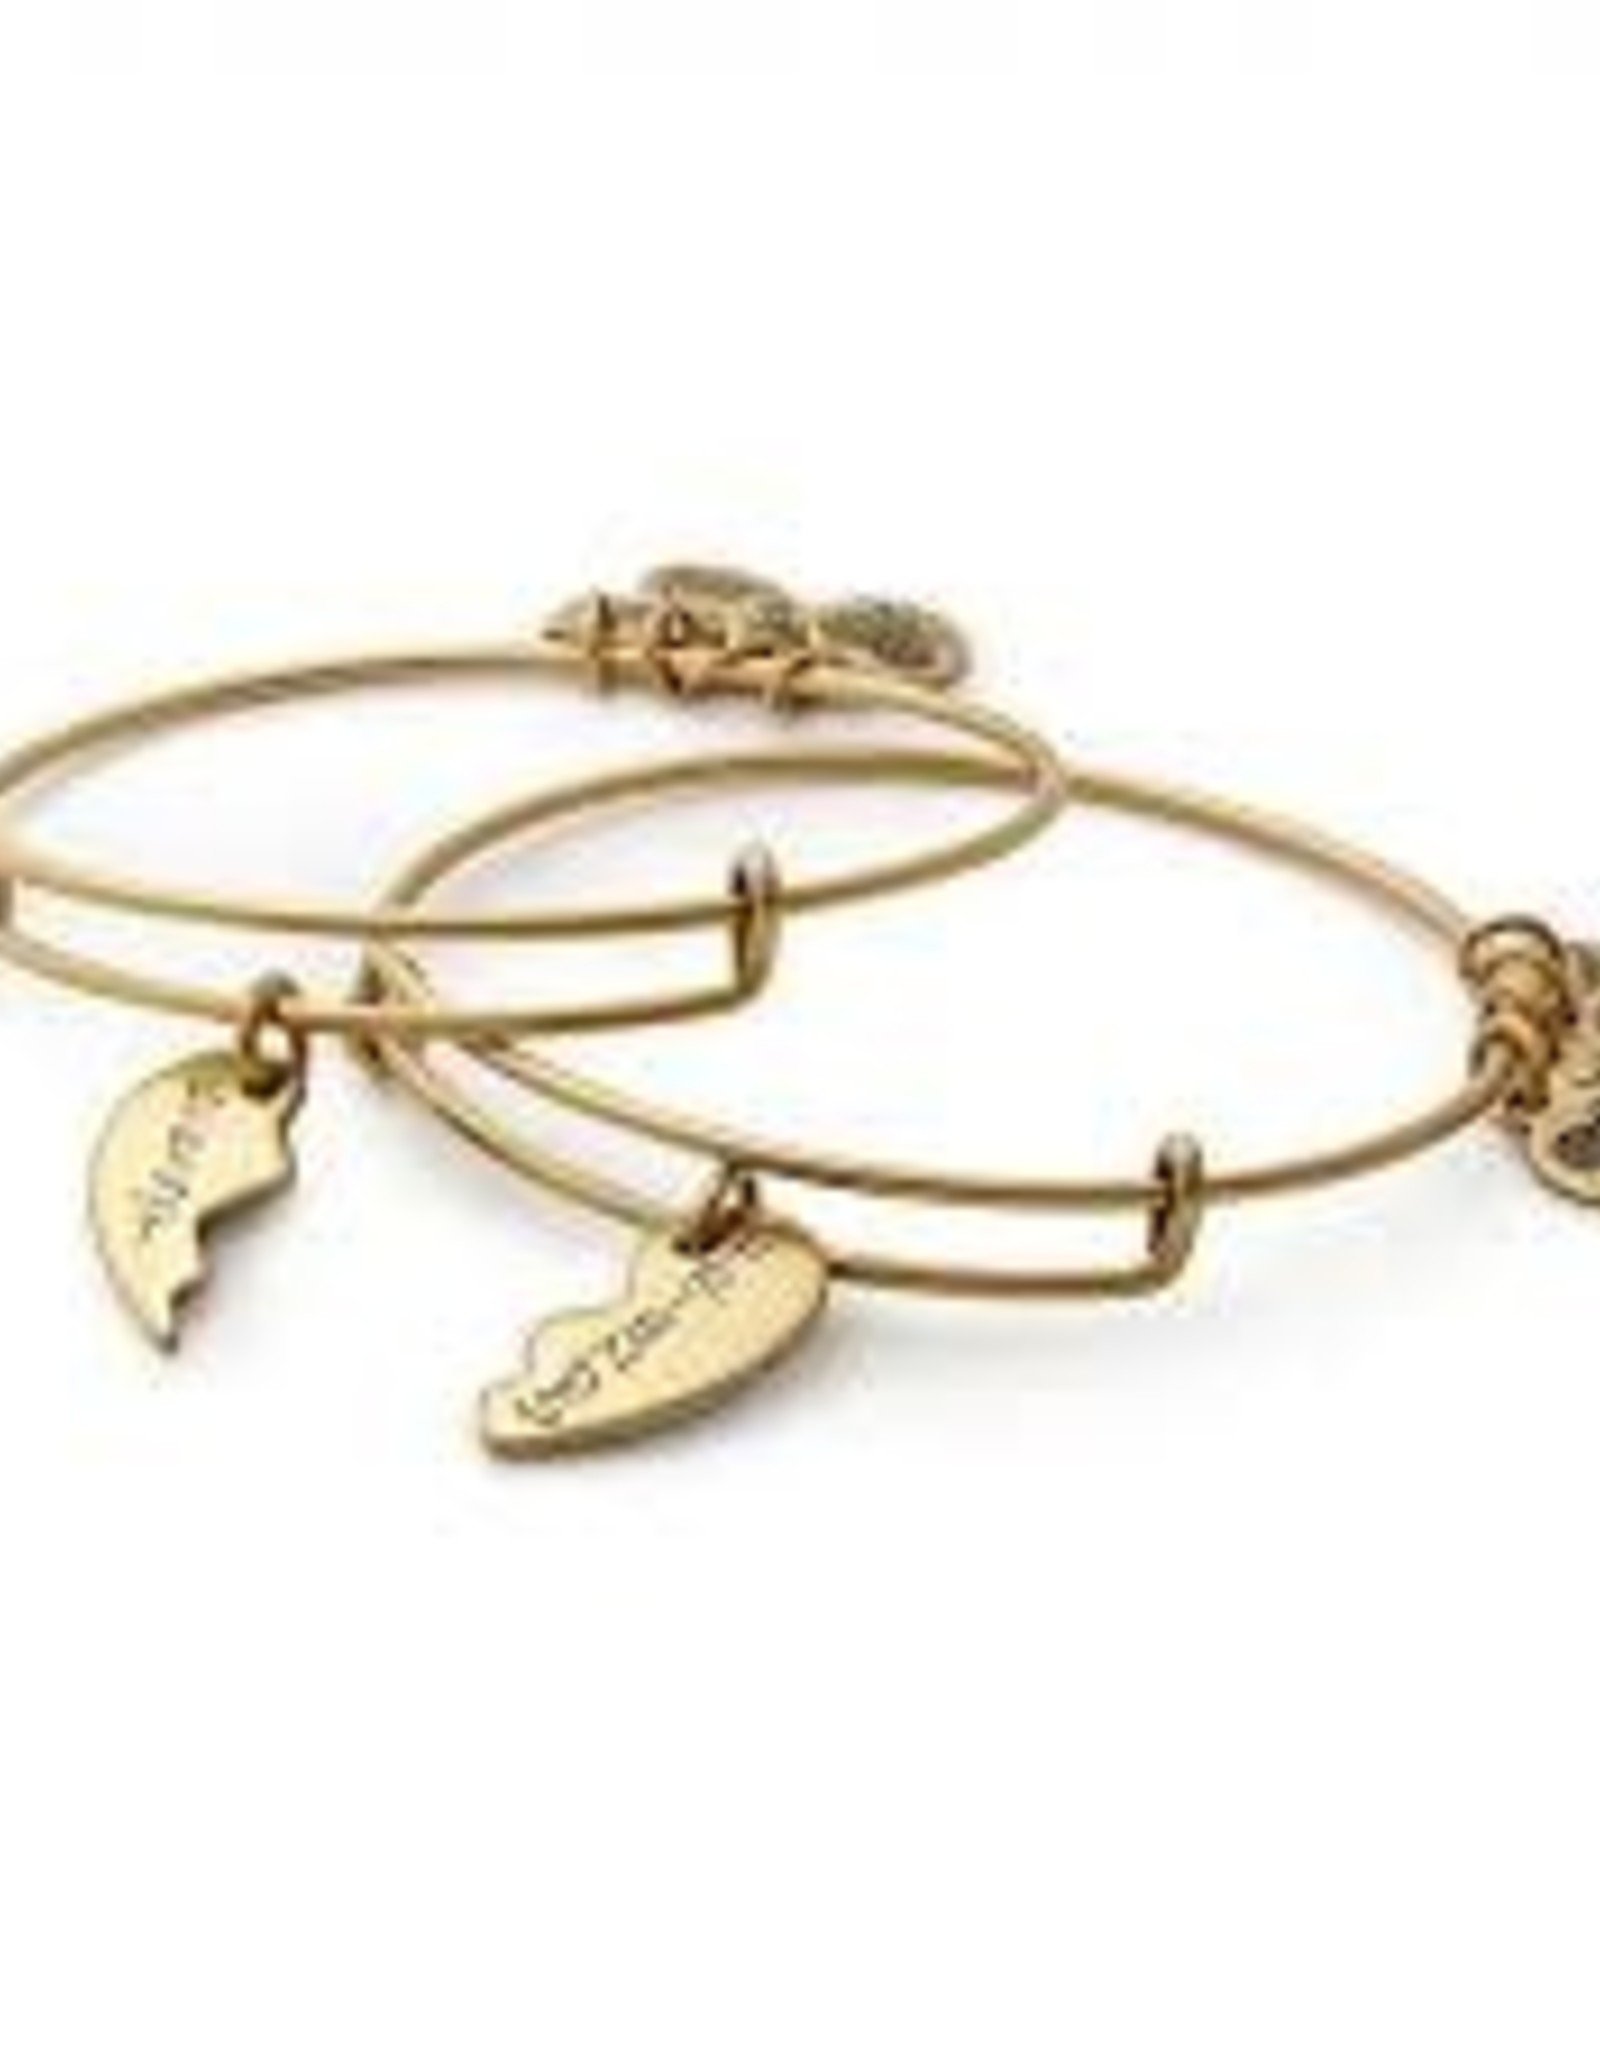 Alex and Ani Best Friends, set of 2